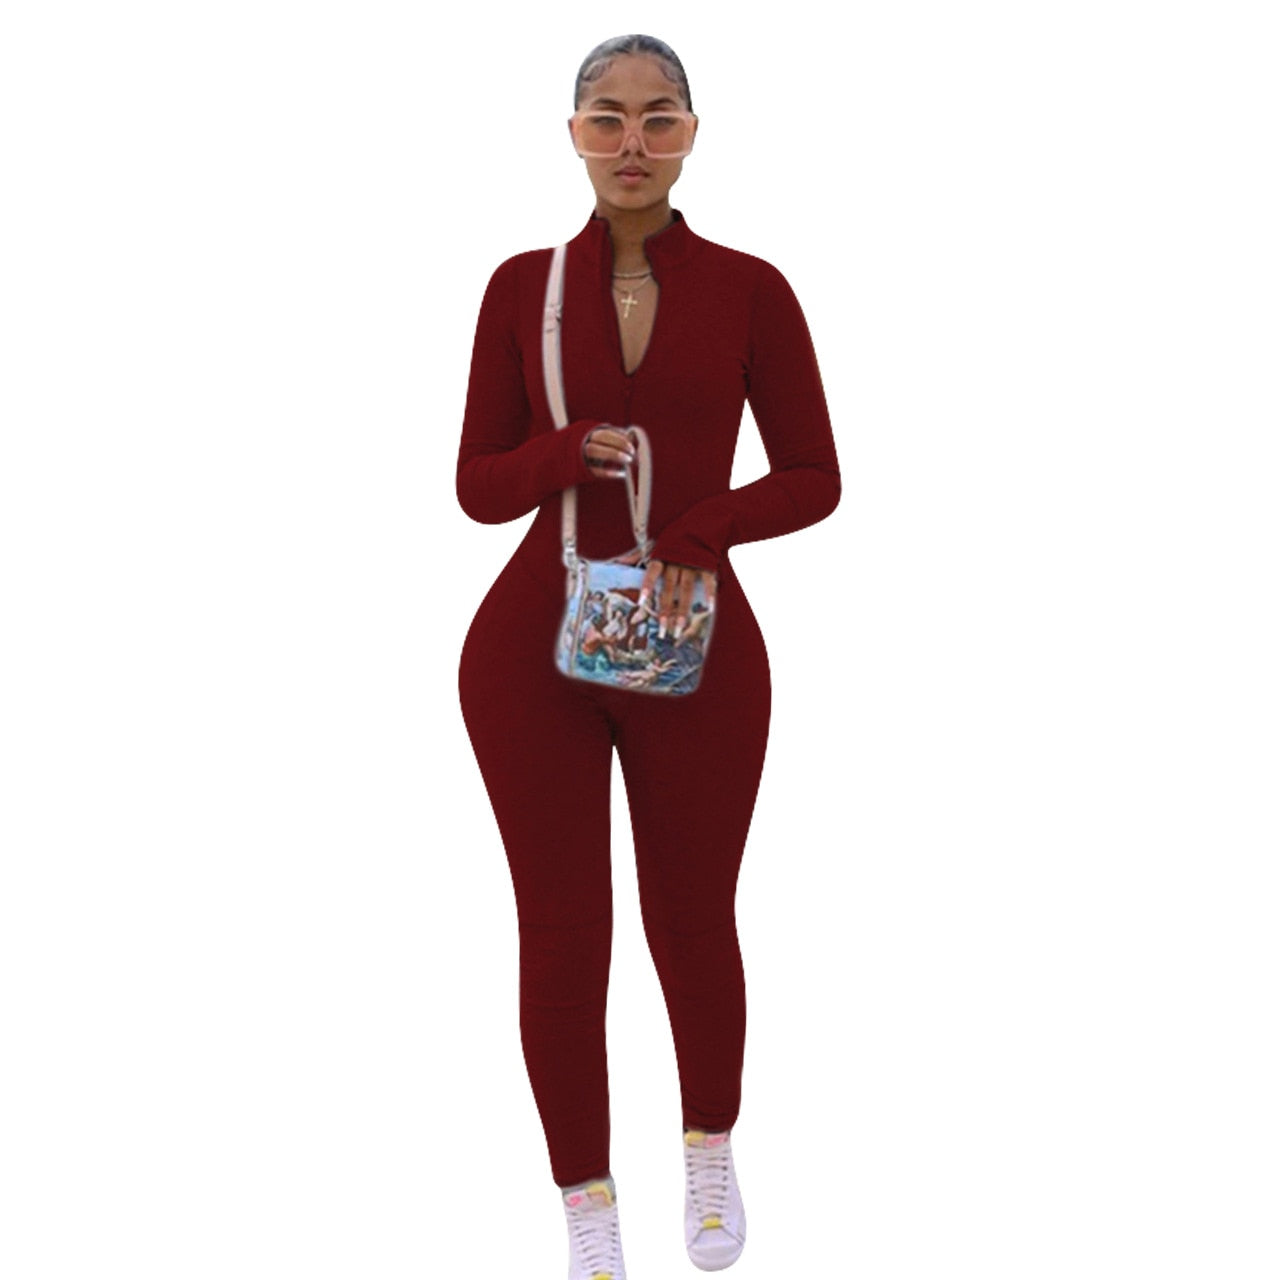 Echoine Zipper Long Sleeve Jumpsuit Green Gray Skinny Bodycon Sexy Rompers Autumn Rompers Party Clubwear Outfits Overalls Women